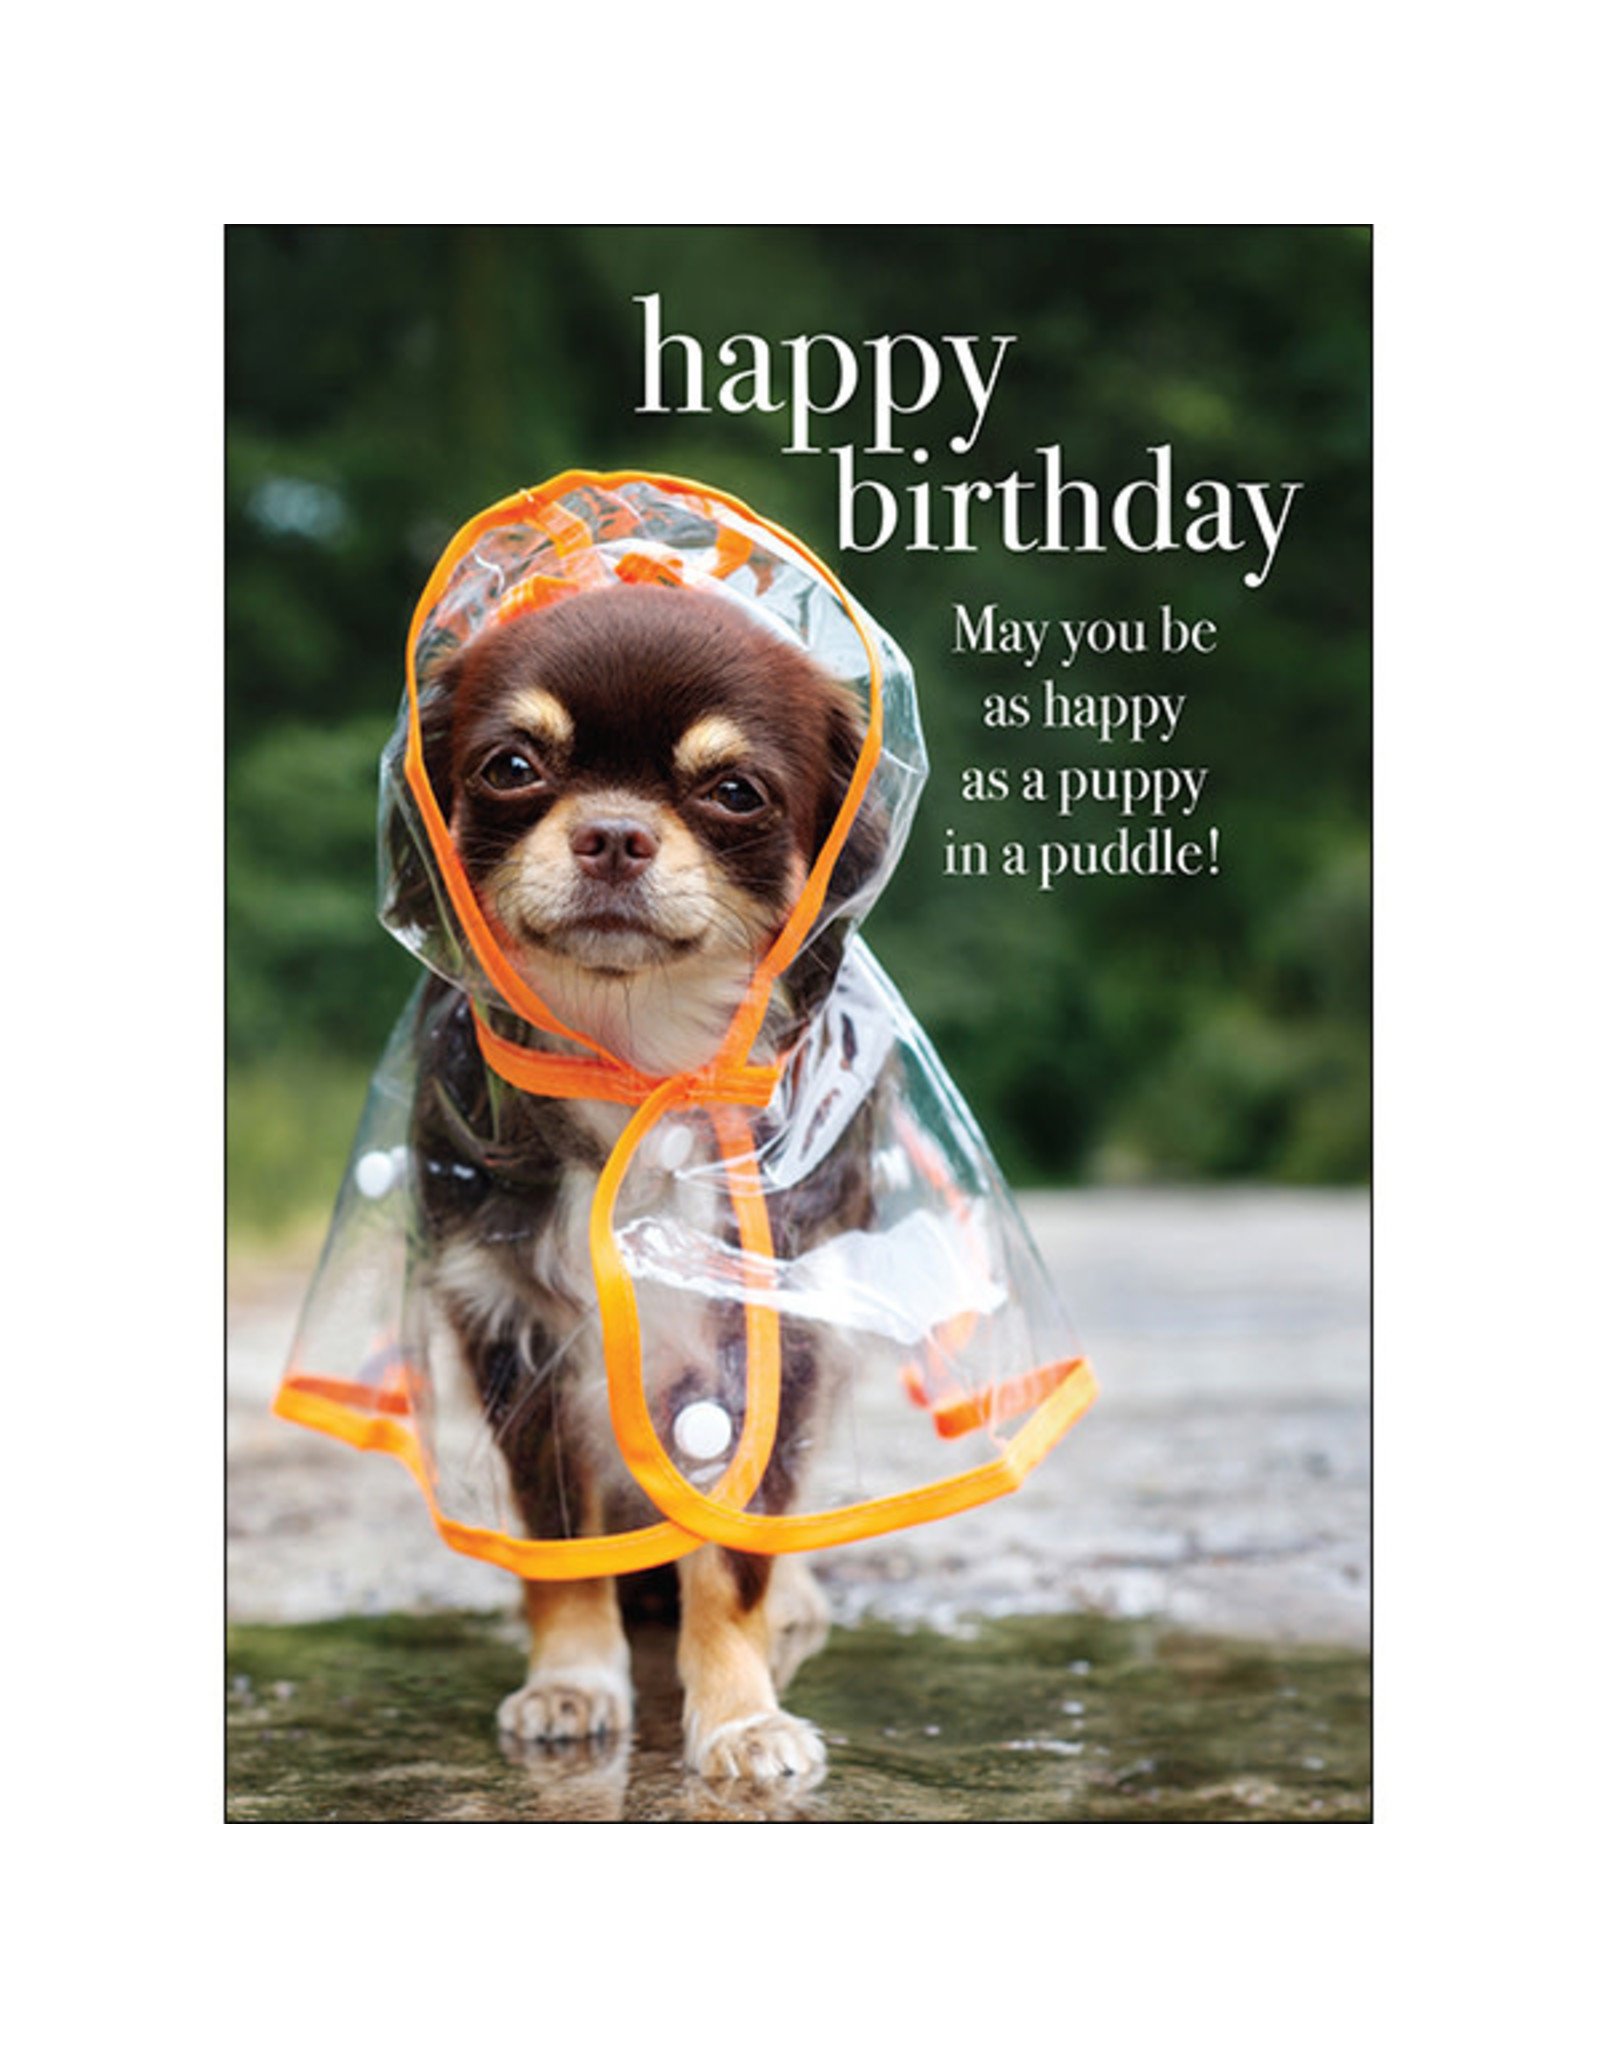 Affirmations Publishing House Greeting Card - Puppy in a Puddle